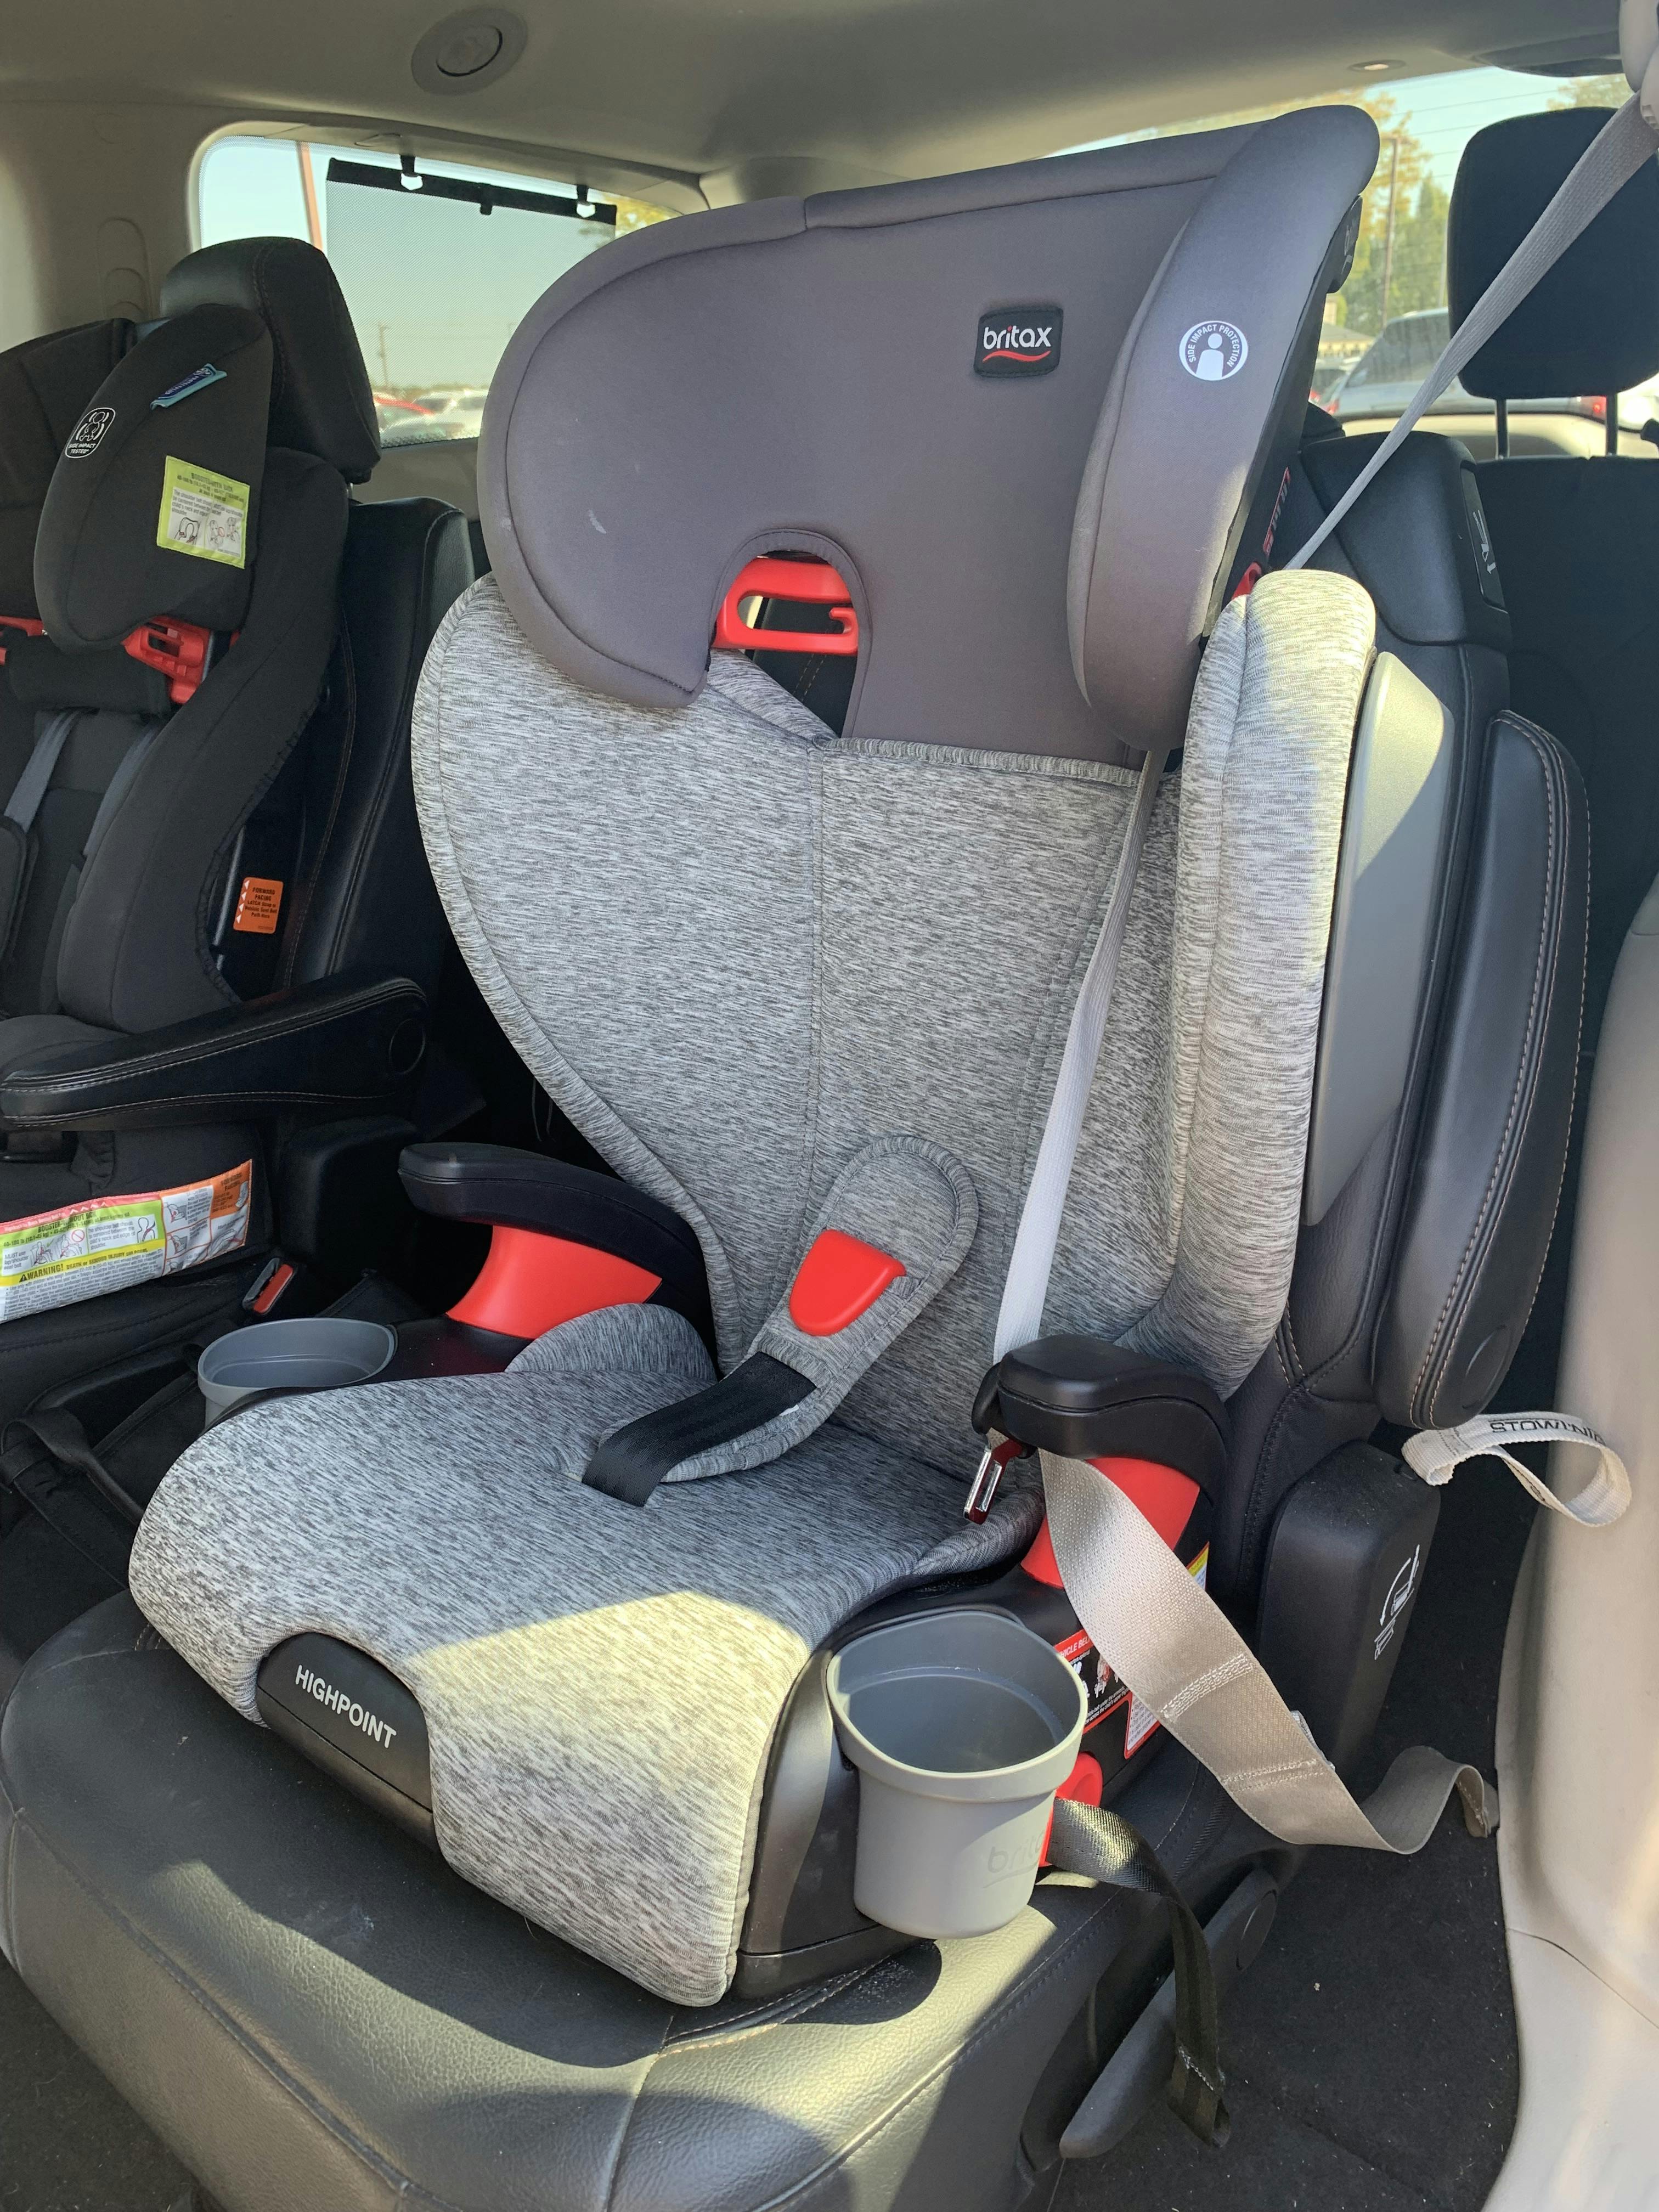 The Britax Highpoint 2-Stage Booster Car Seat in a car. 